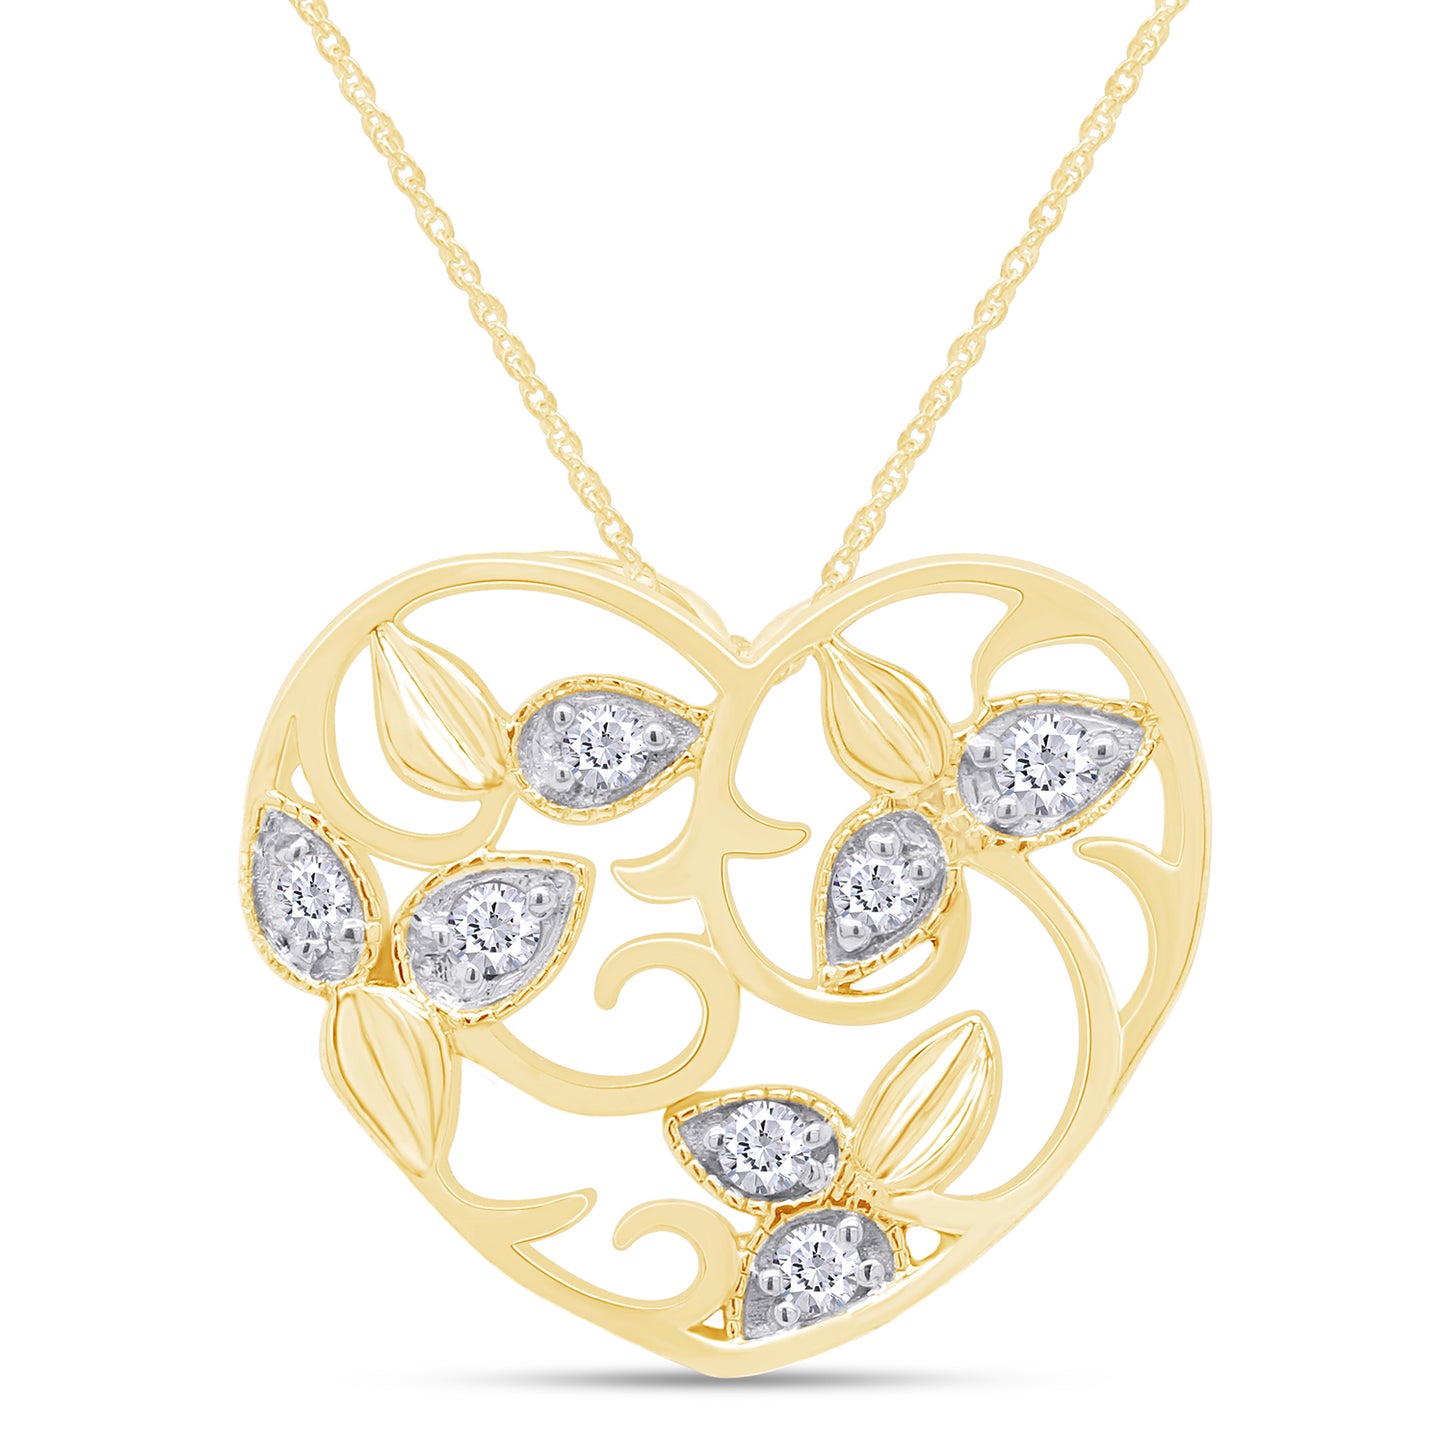 Load image into Gallery viewer, 1/5 Carat Round White Natural Diamond Filigree Vintage-Style Heart Pendant Necklace In 925 Sterling Silver
